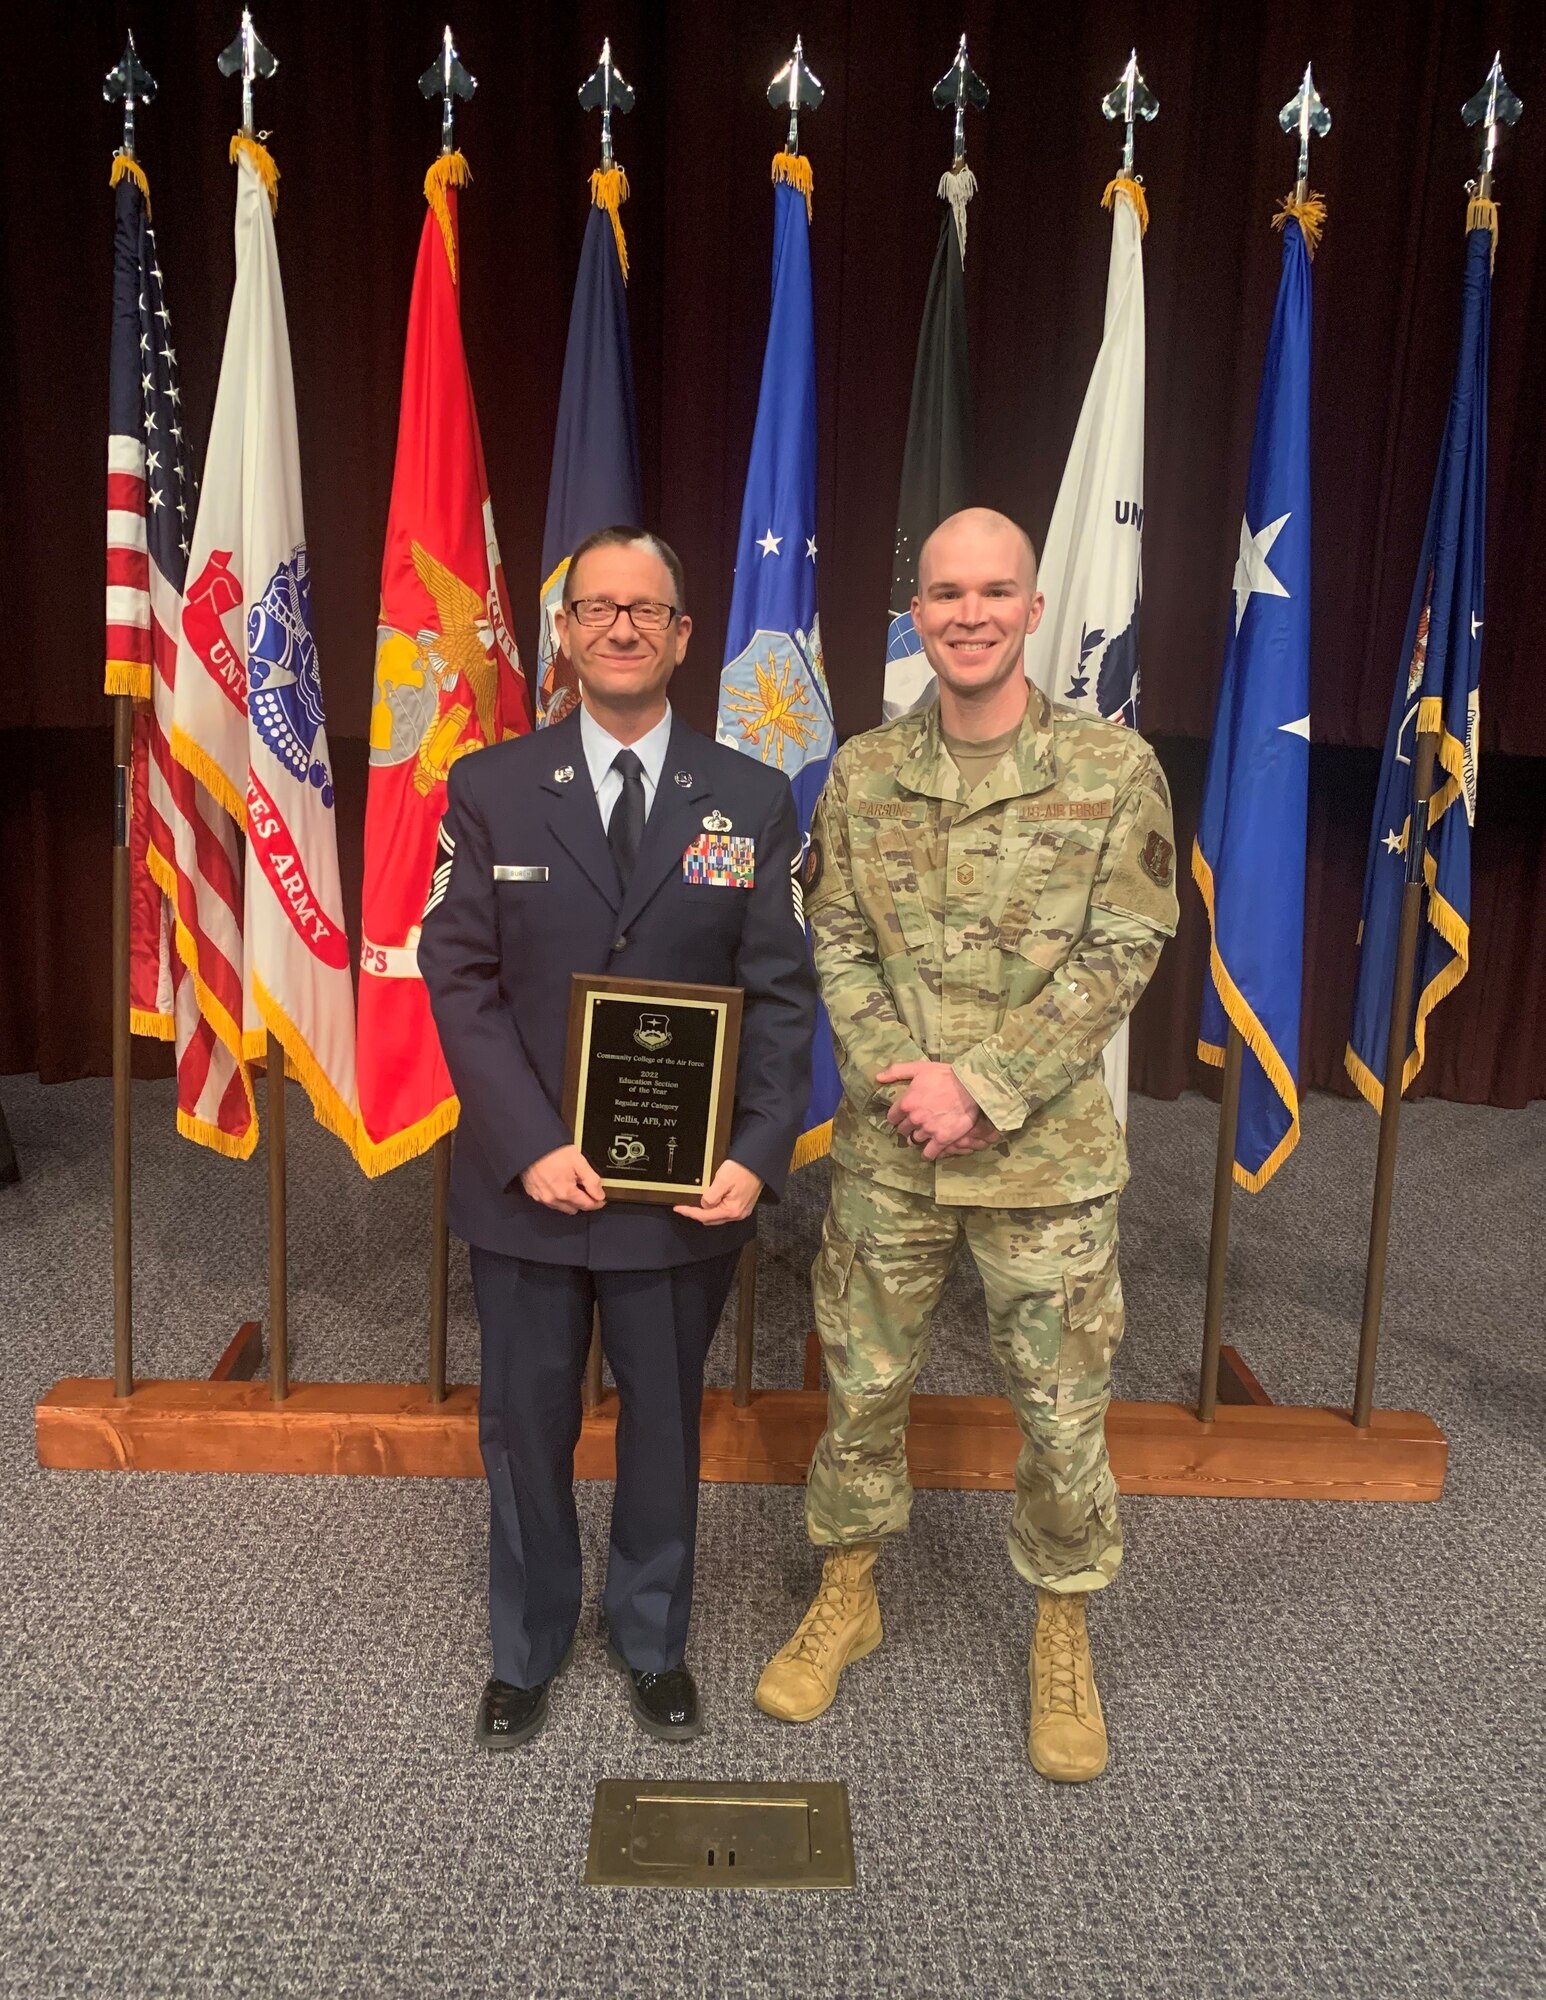 132d Wing Members, Senior Master Sgt. Gary Burch and Master Sgt. Jacob Parsons pose for a photo with their newly received award